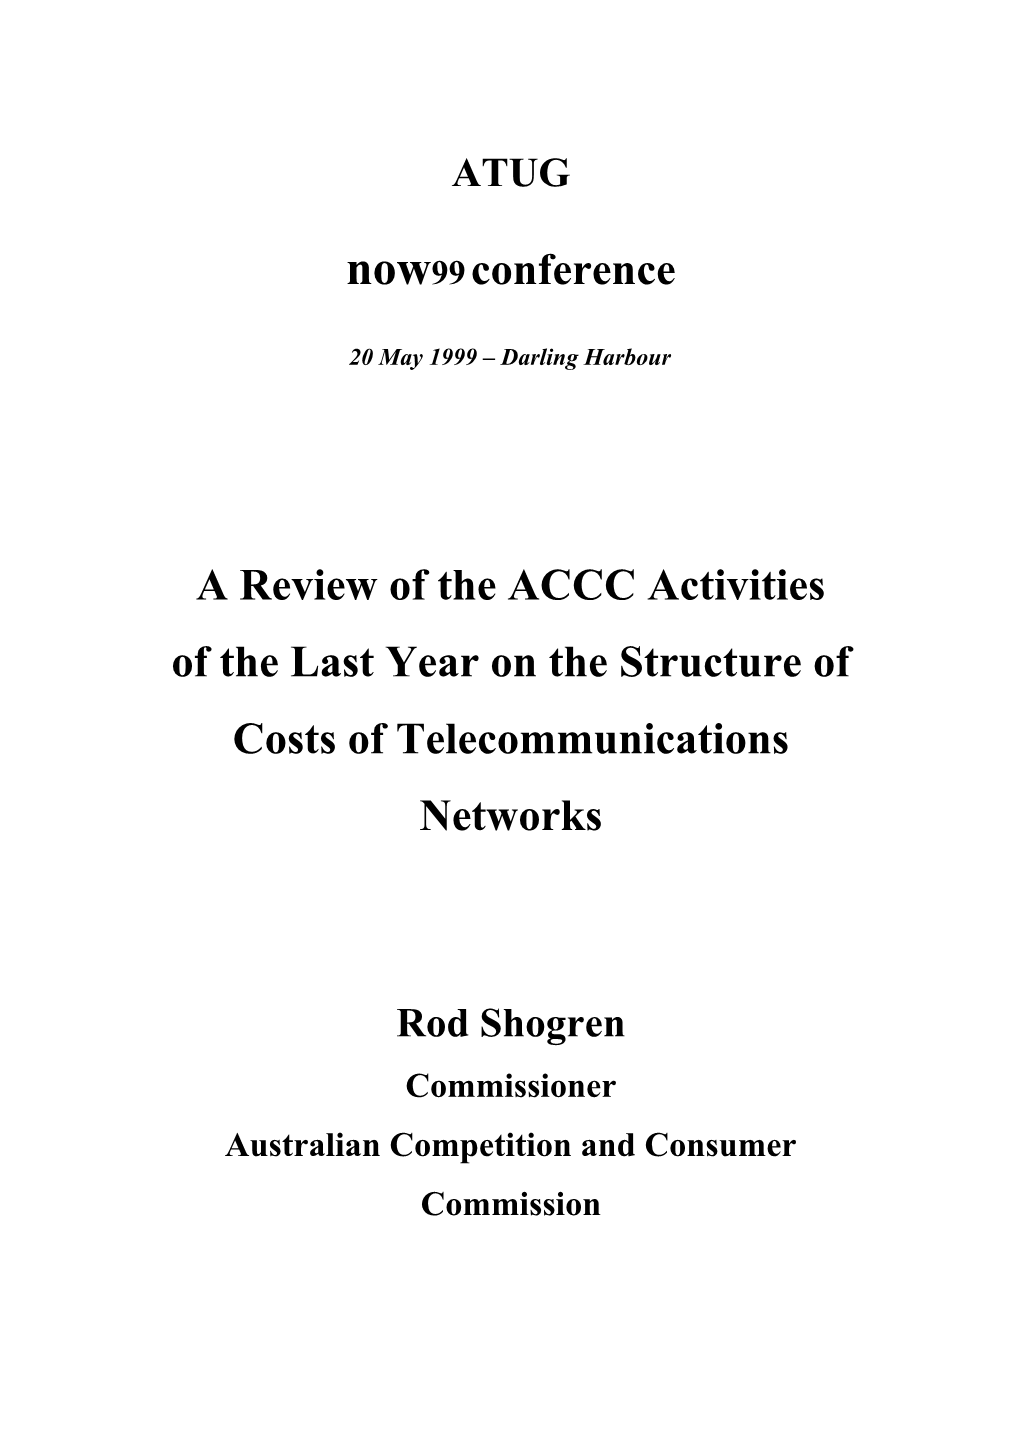 A Review of the ACCC Activities of the Last Year on the Structure of Costs of Telecommunications